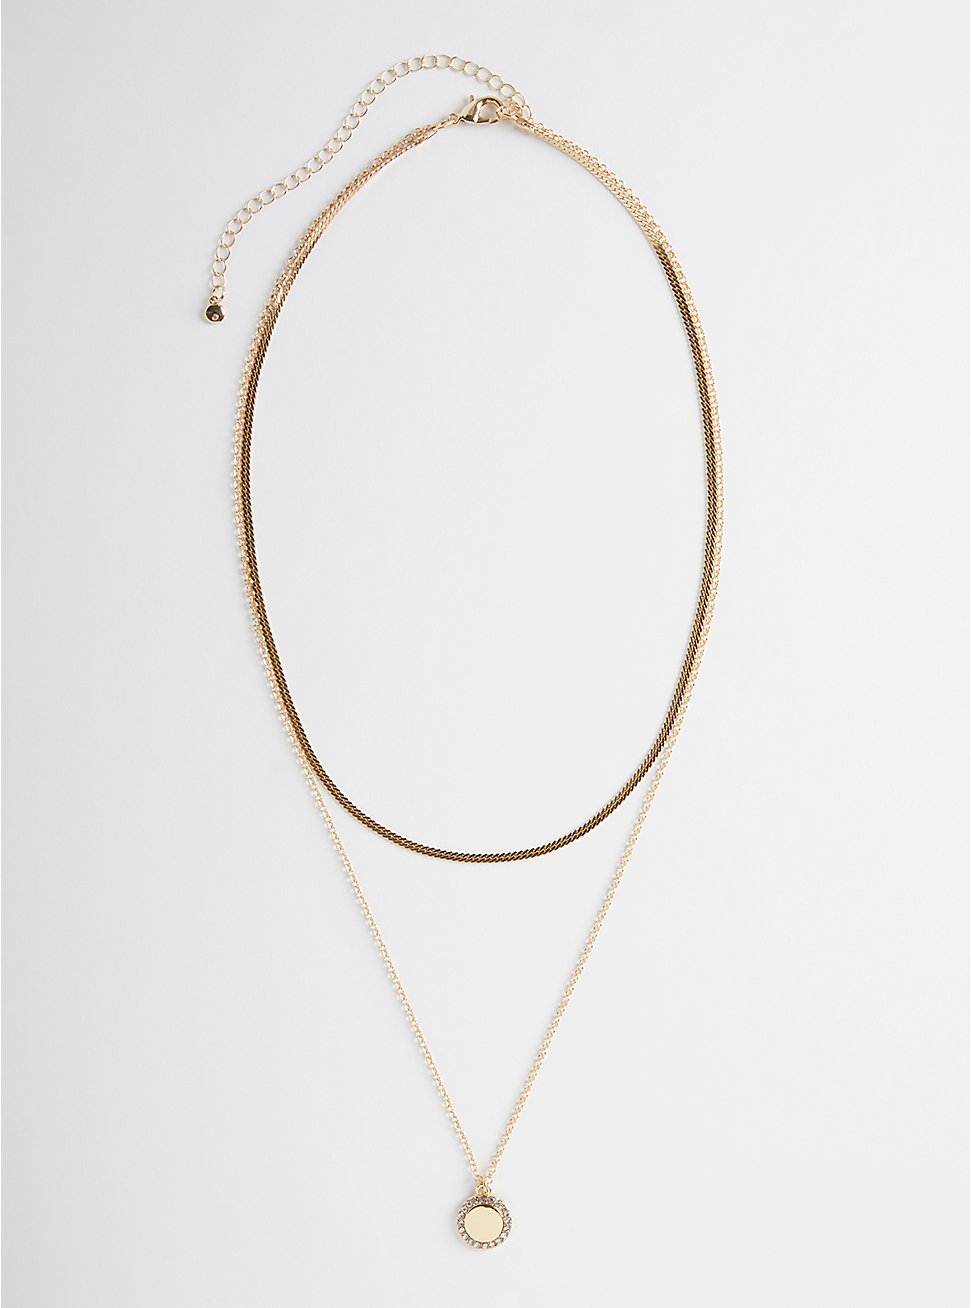 Snake Chain Layered Necklace with Disc - Gold Tone , , hi-res